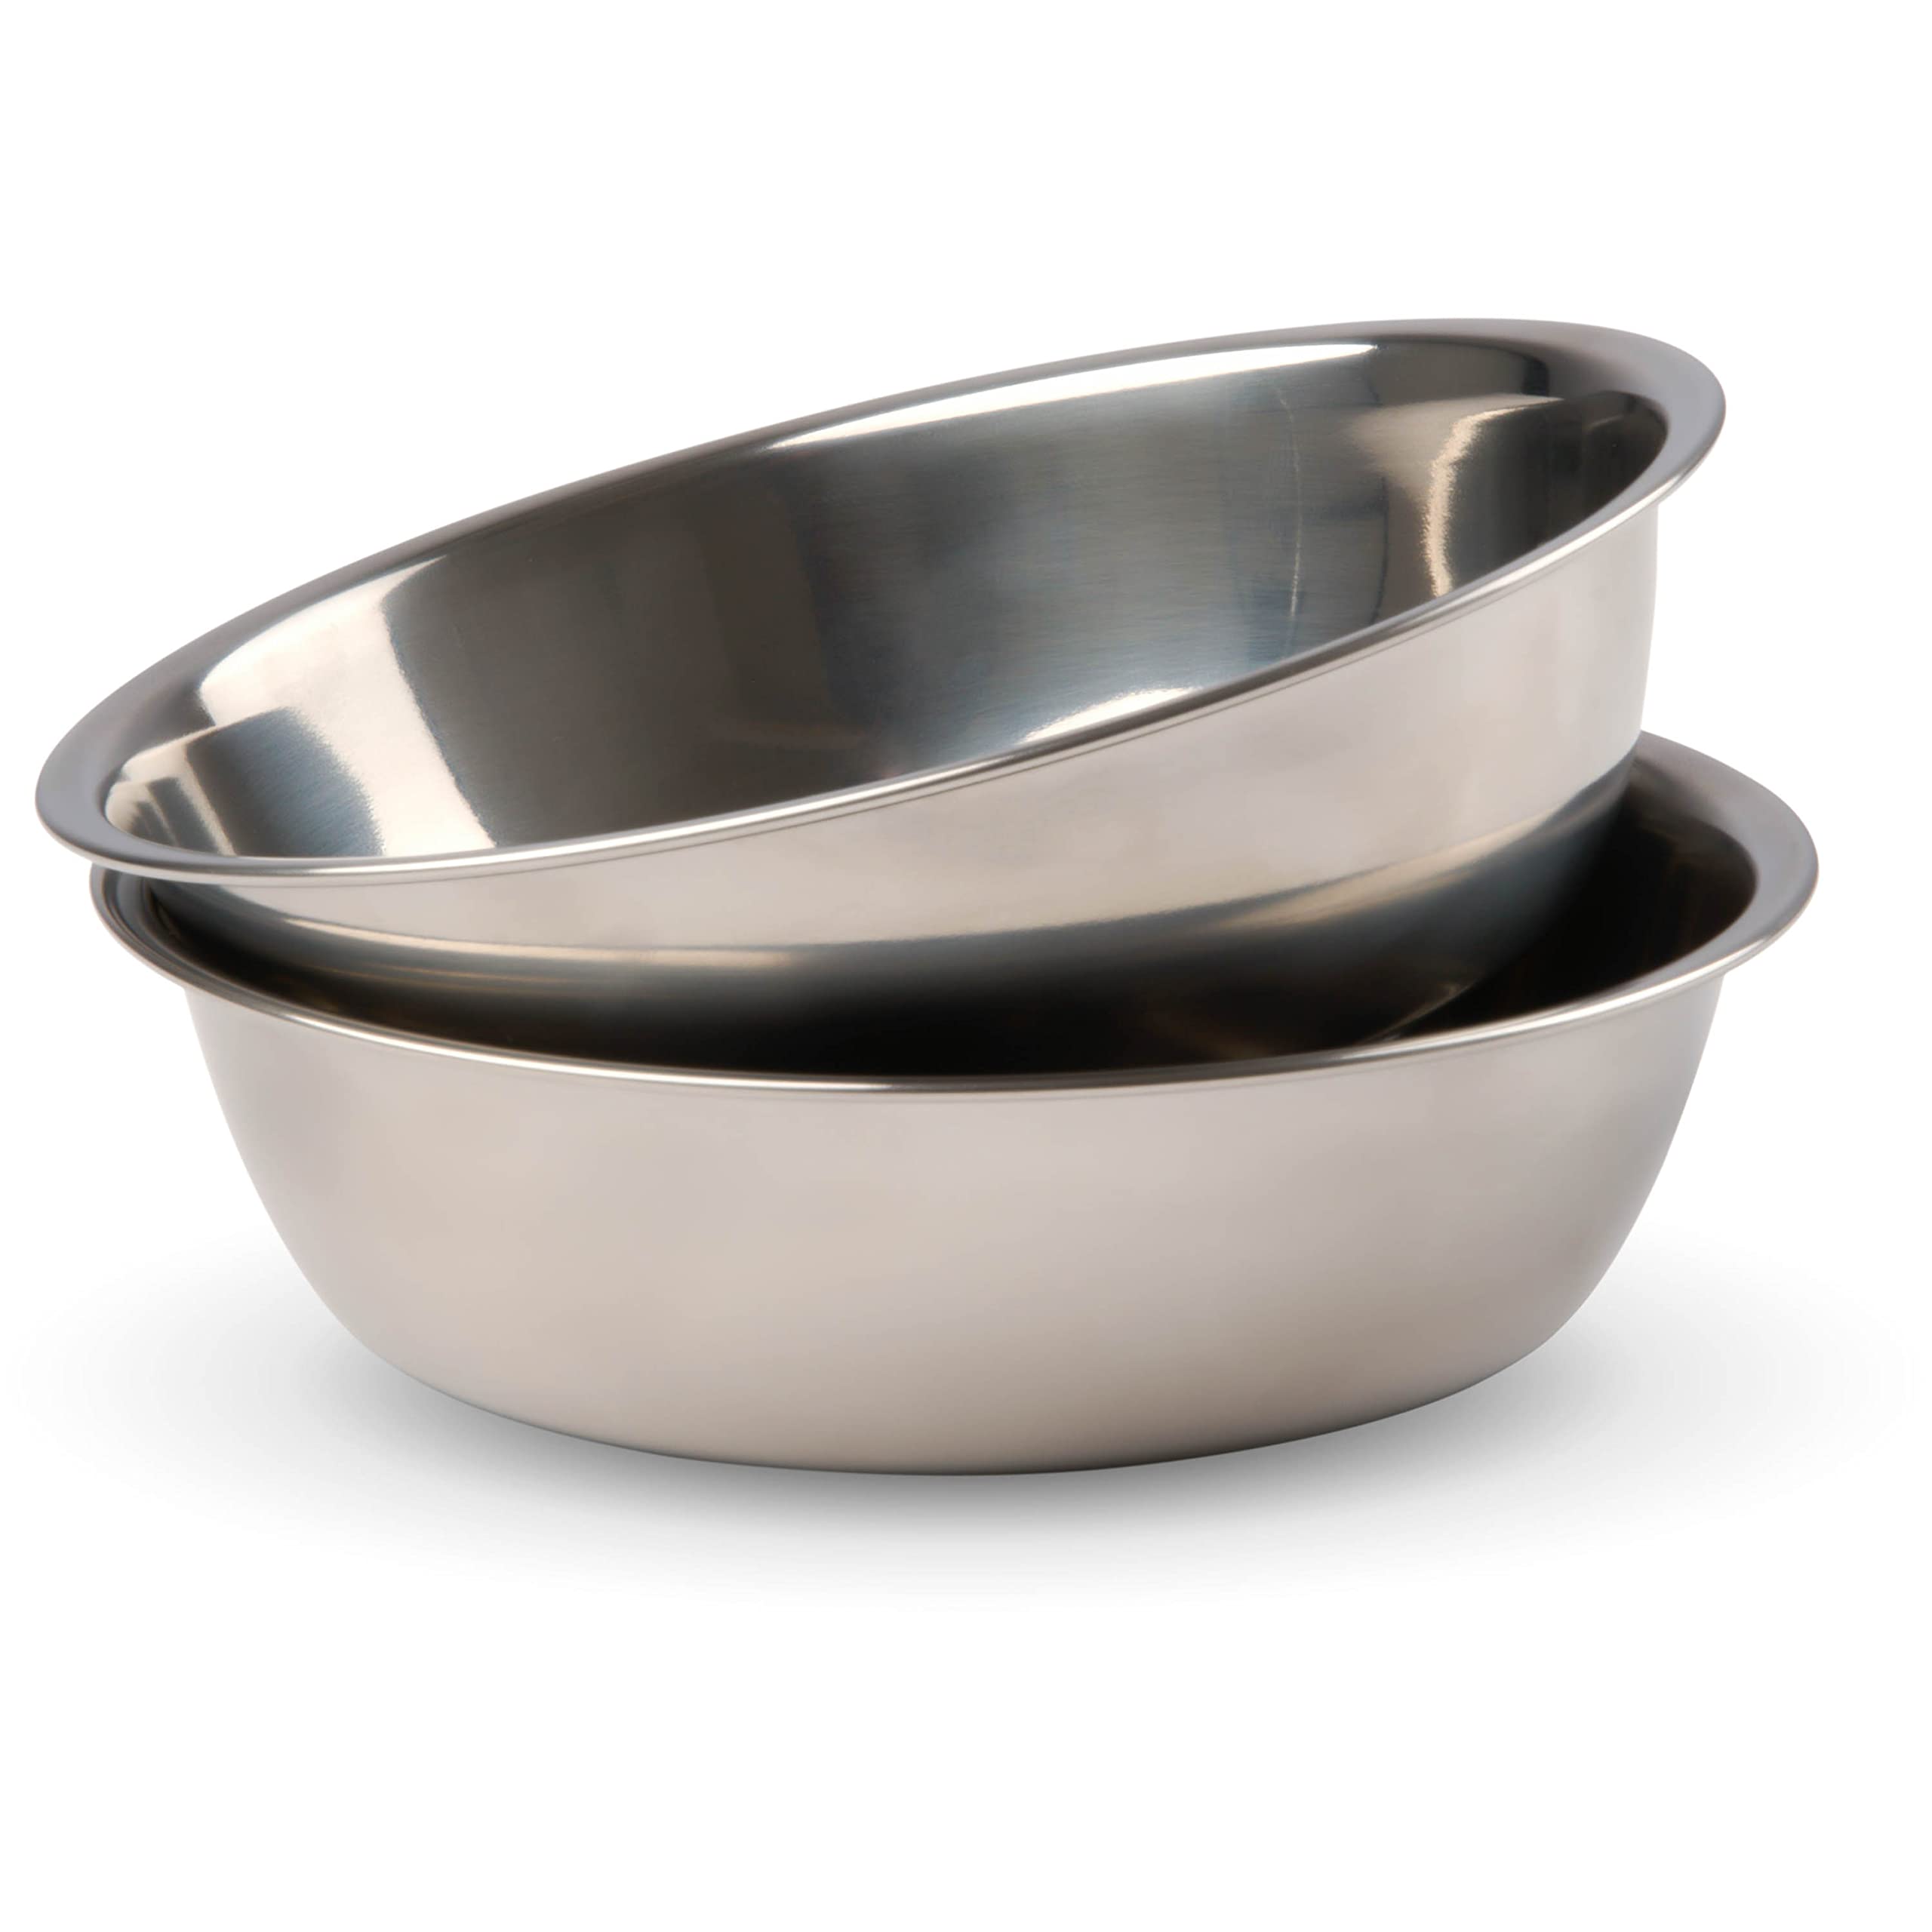 Book Cover Bonza Two Piece Stainless Steel Dog Bowls Small, 12oz Pet Water and Food Bowls, Basic Metal Dog Bowl or Cat Bowls, Set of 2 Bowls 2 Stainless Steel Bowls